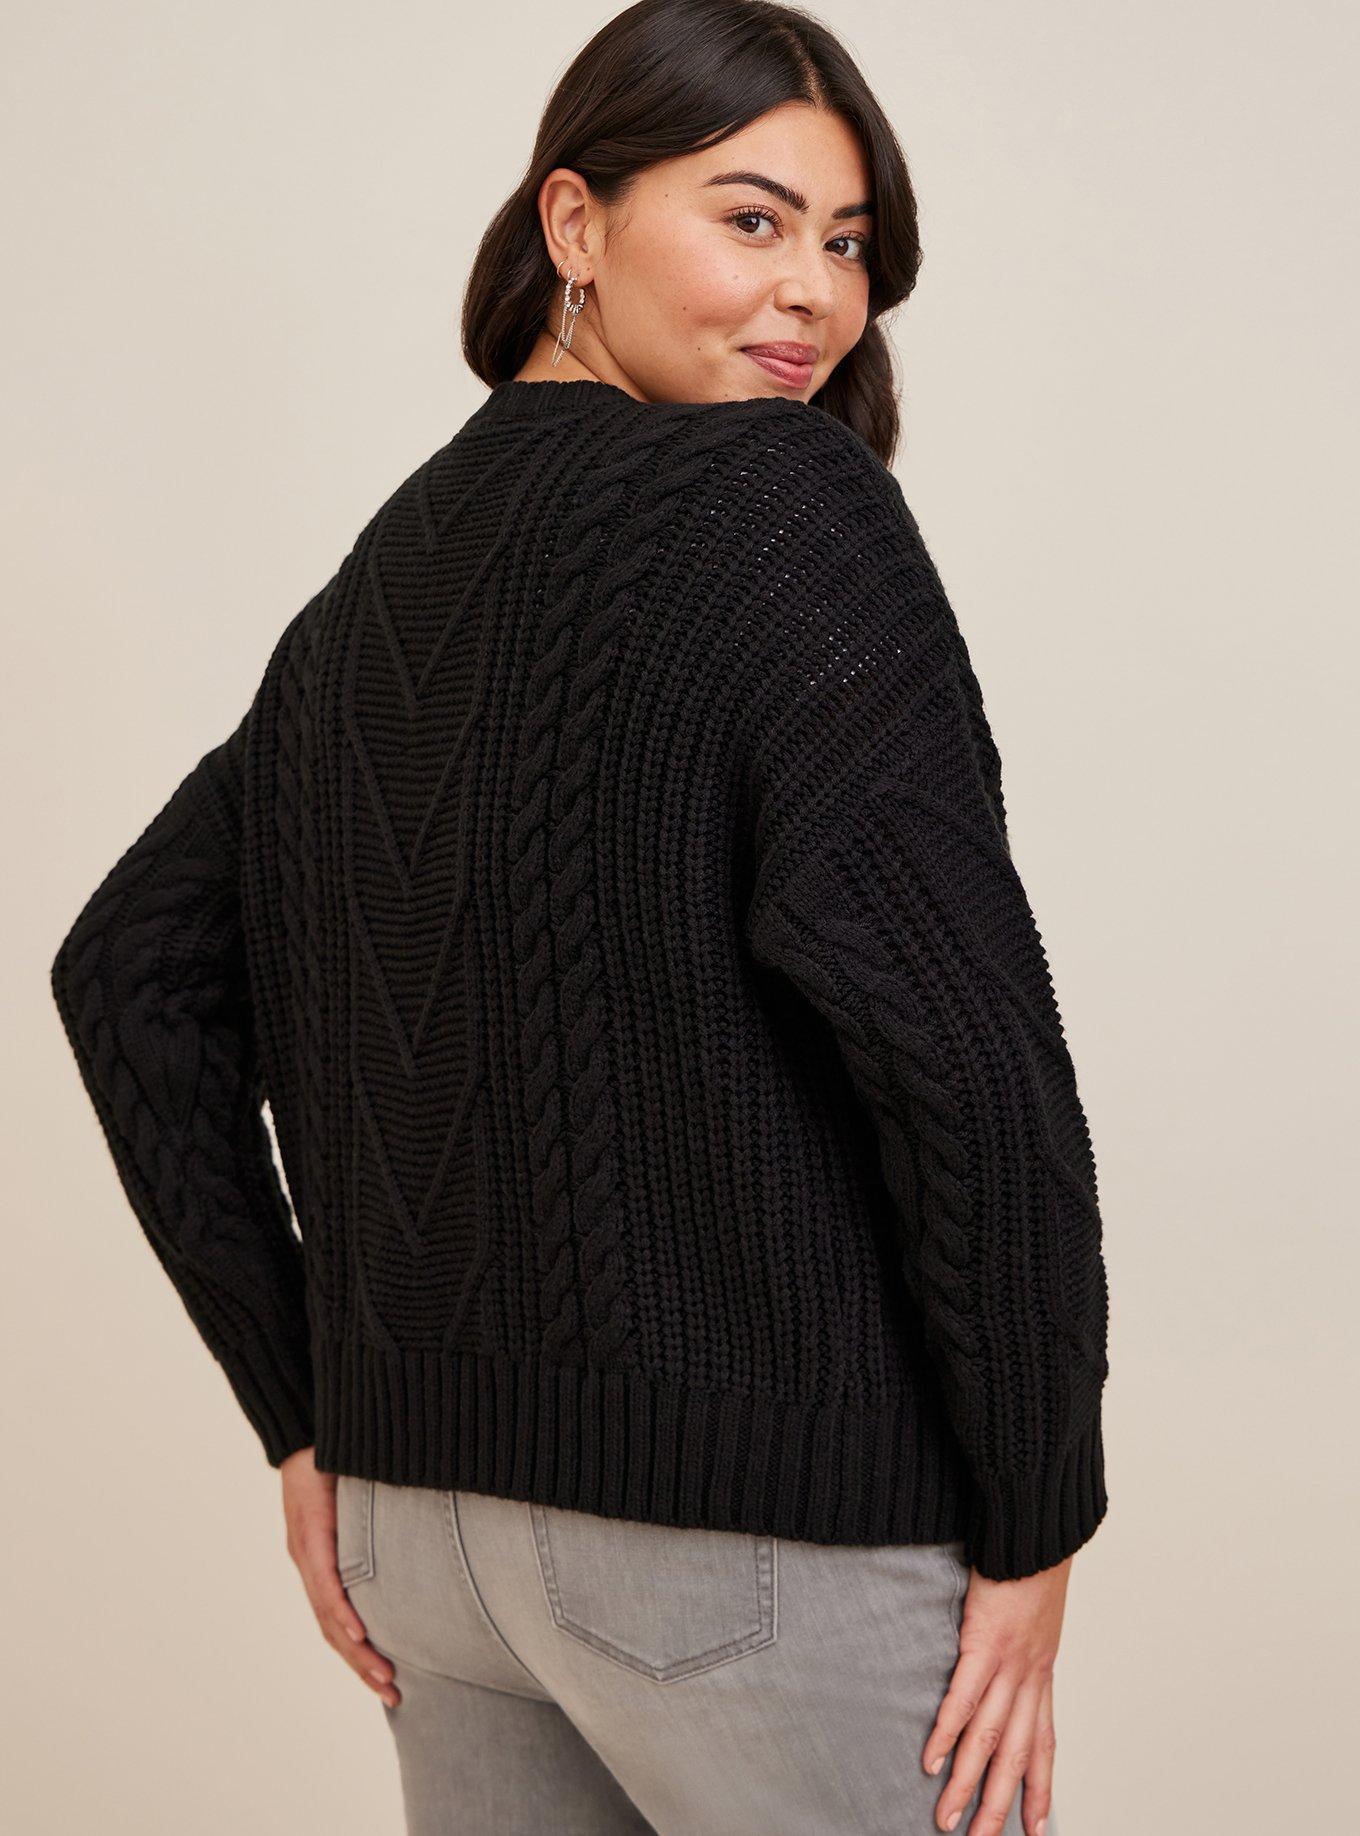 Plus Size - Cable Cardigan V-Neck Sweater - Torrid